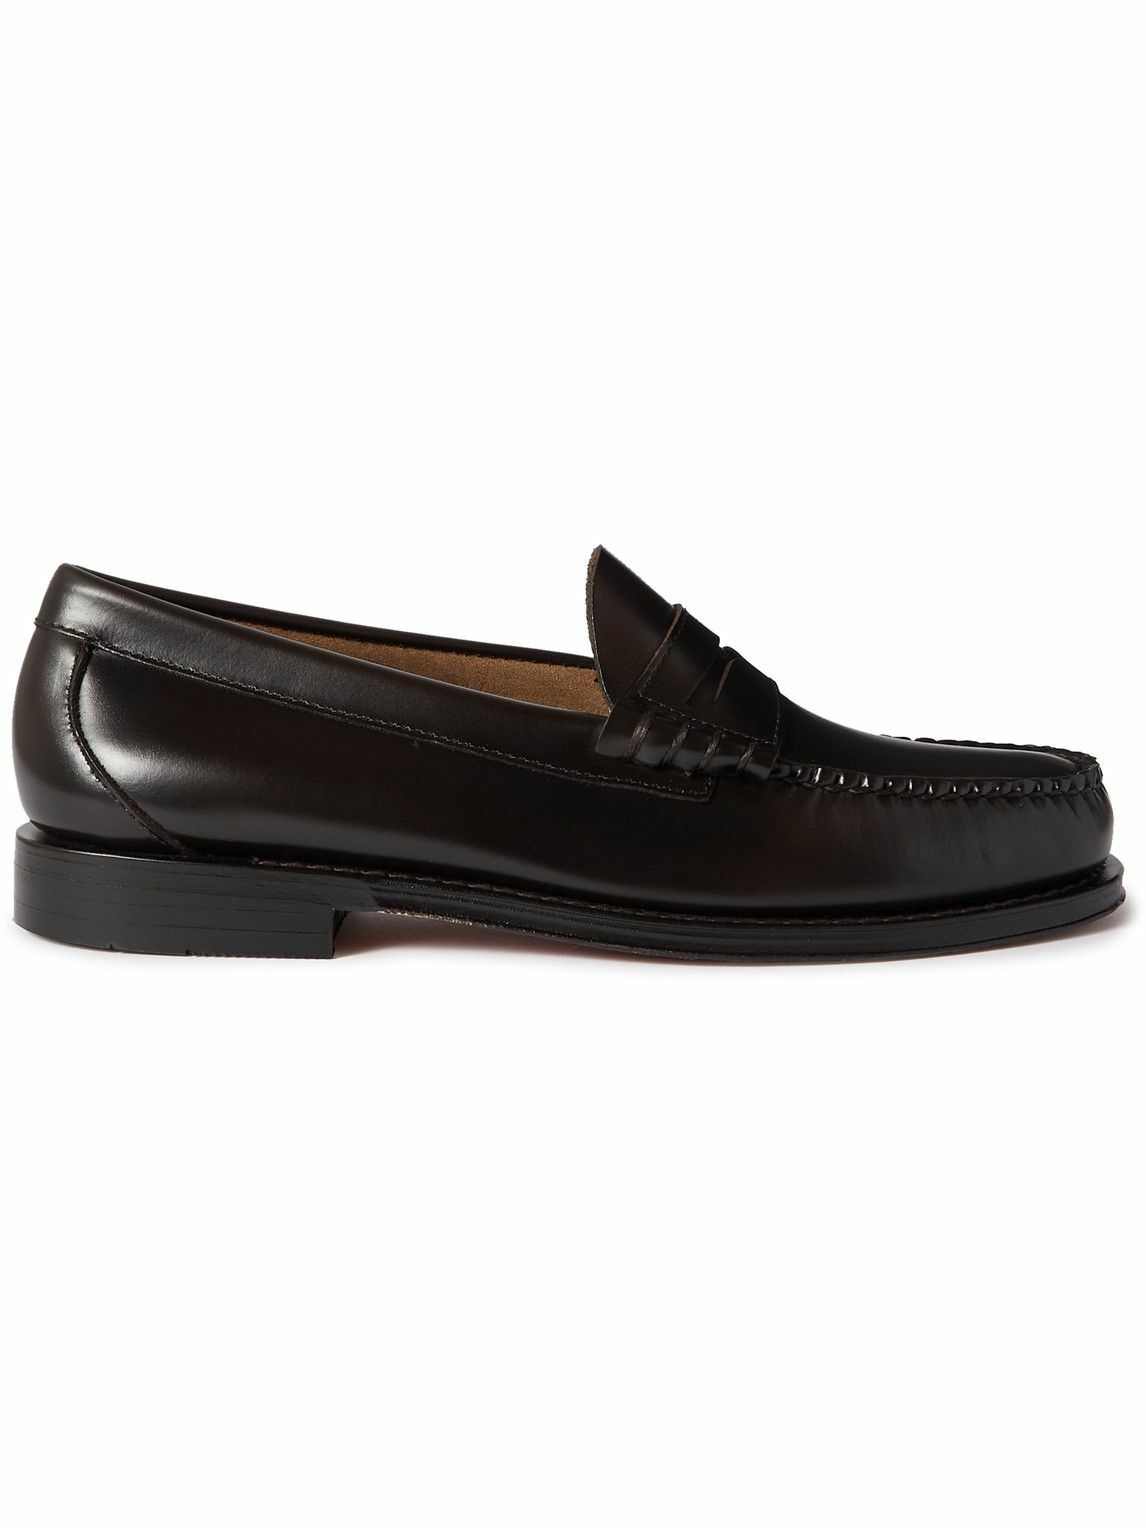 Photo: G.H. Bass & Co. - Weejuns Heritage Larson Leather Penny Loafers - Brown